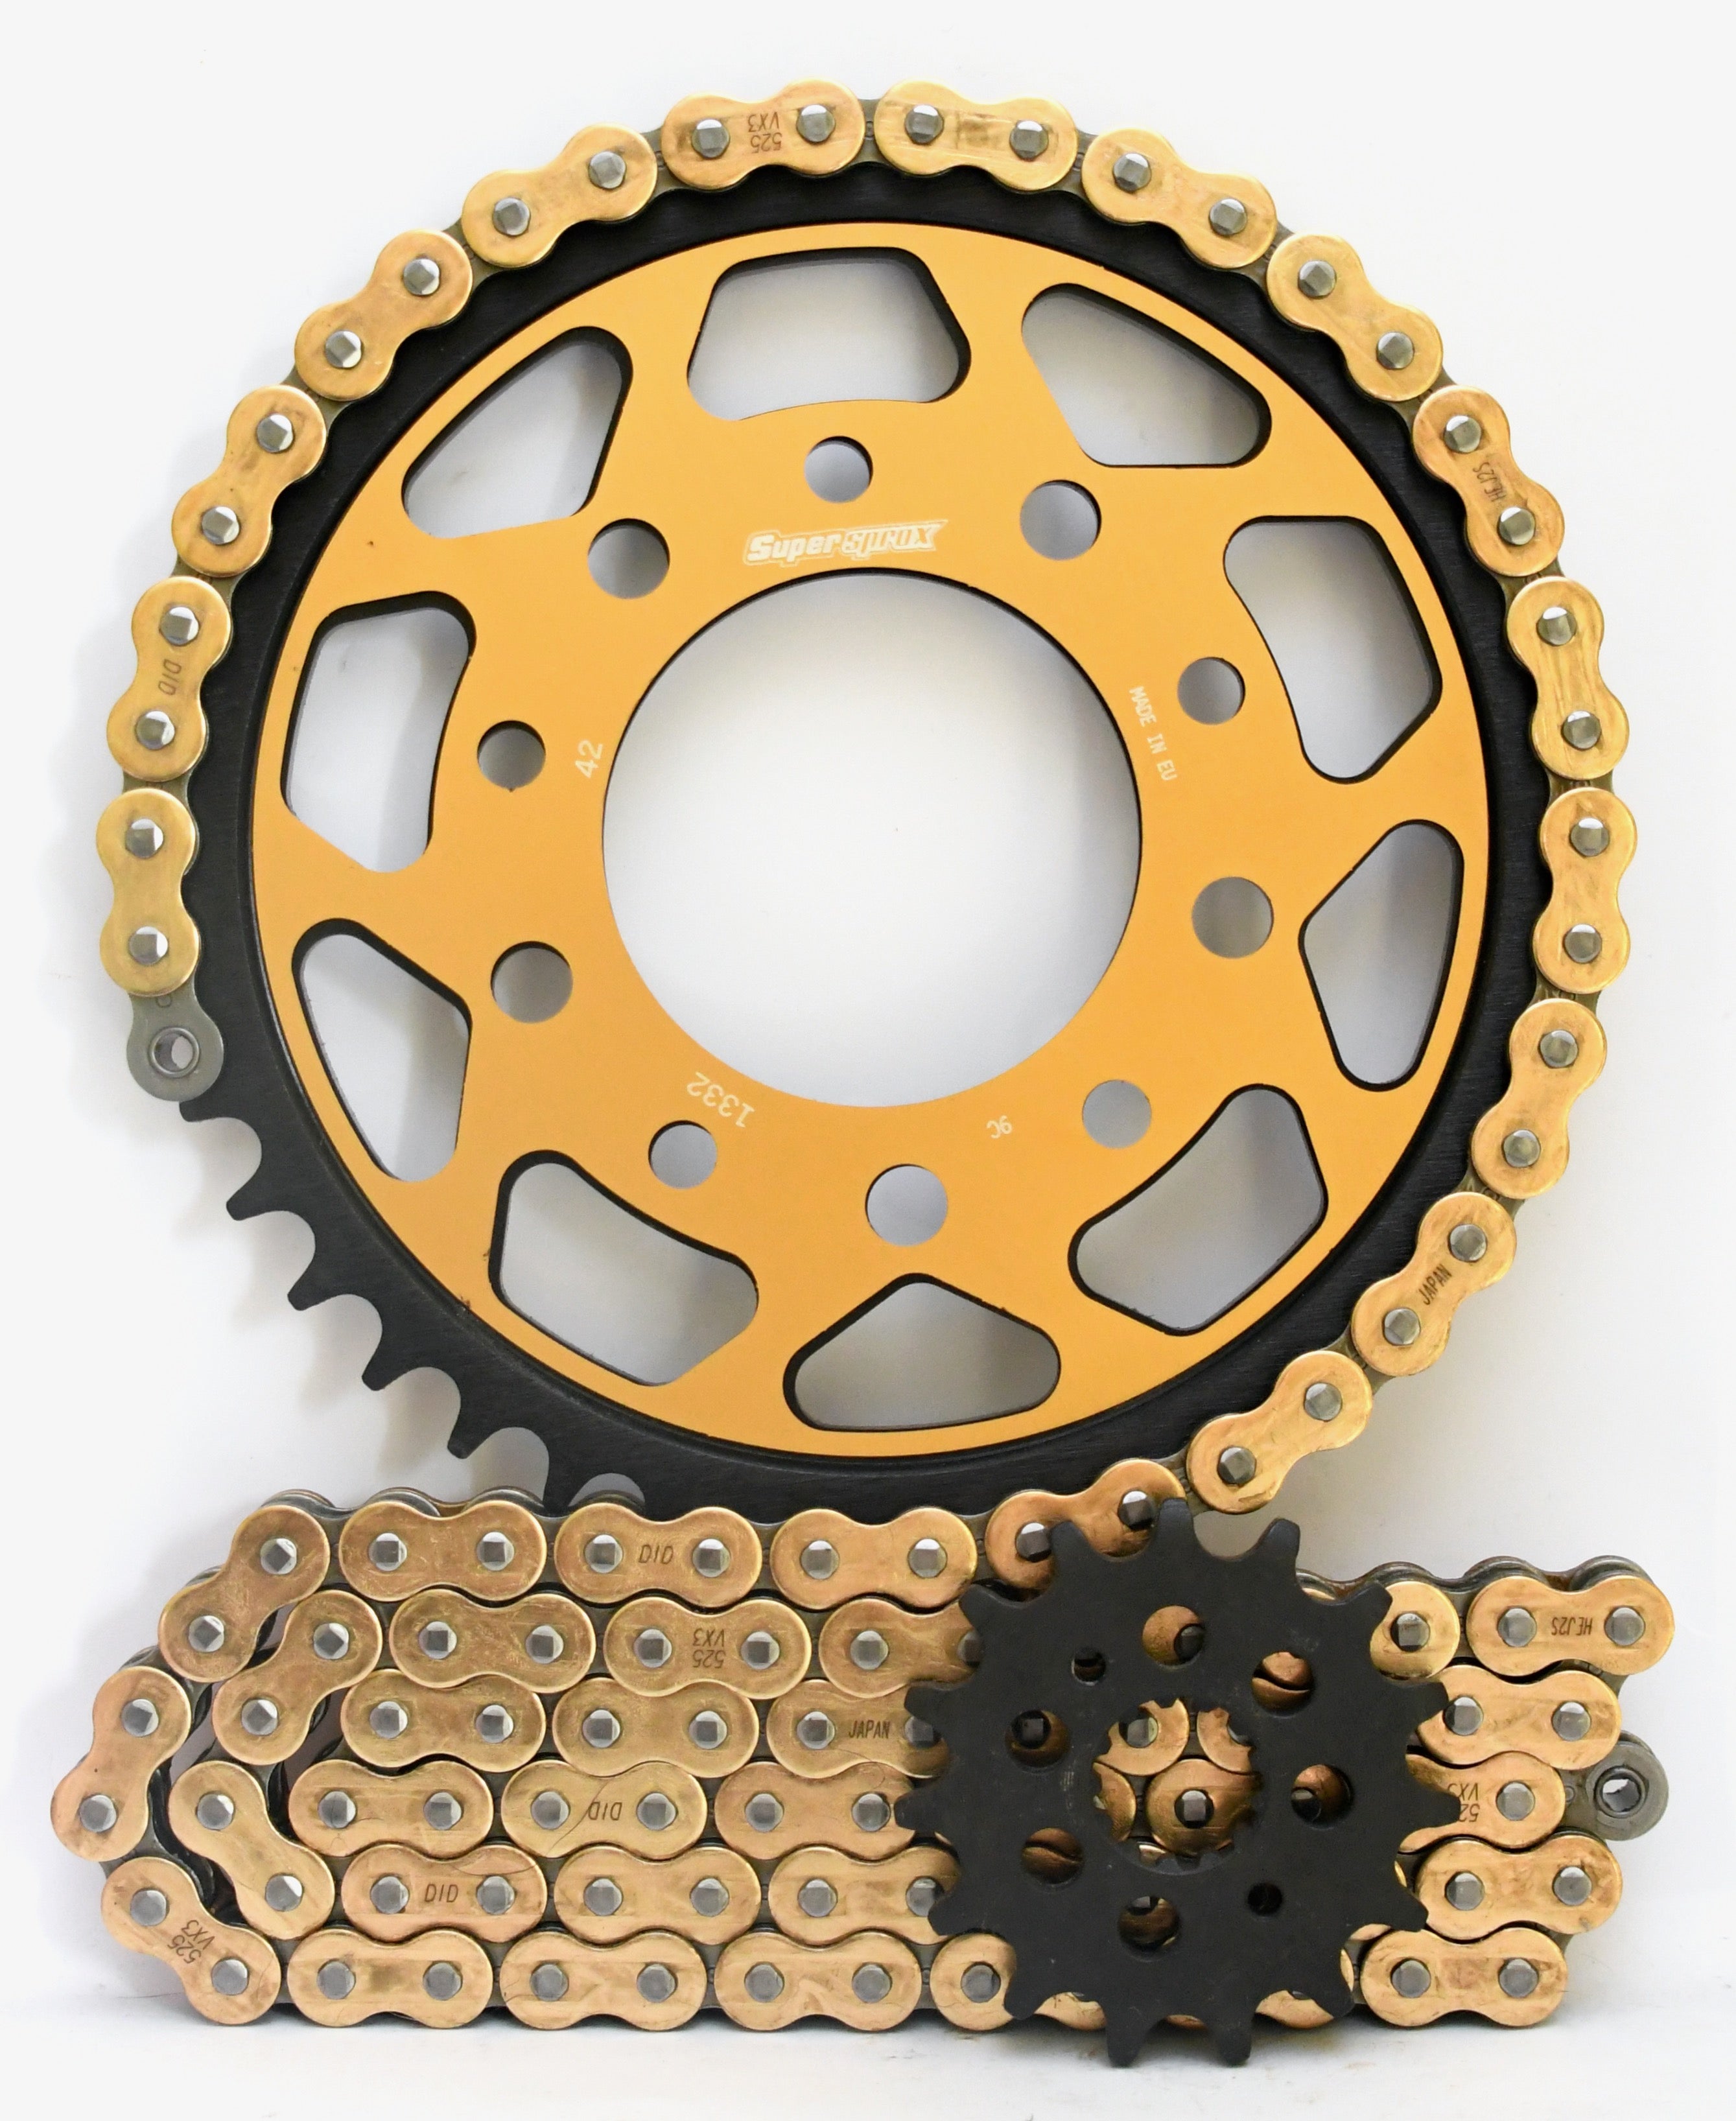 Supersprox Chain and Steel Sprocket Kit - Honda CRF1000/1100 Africa Twin 2016> - Standard Gearing